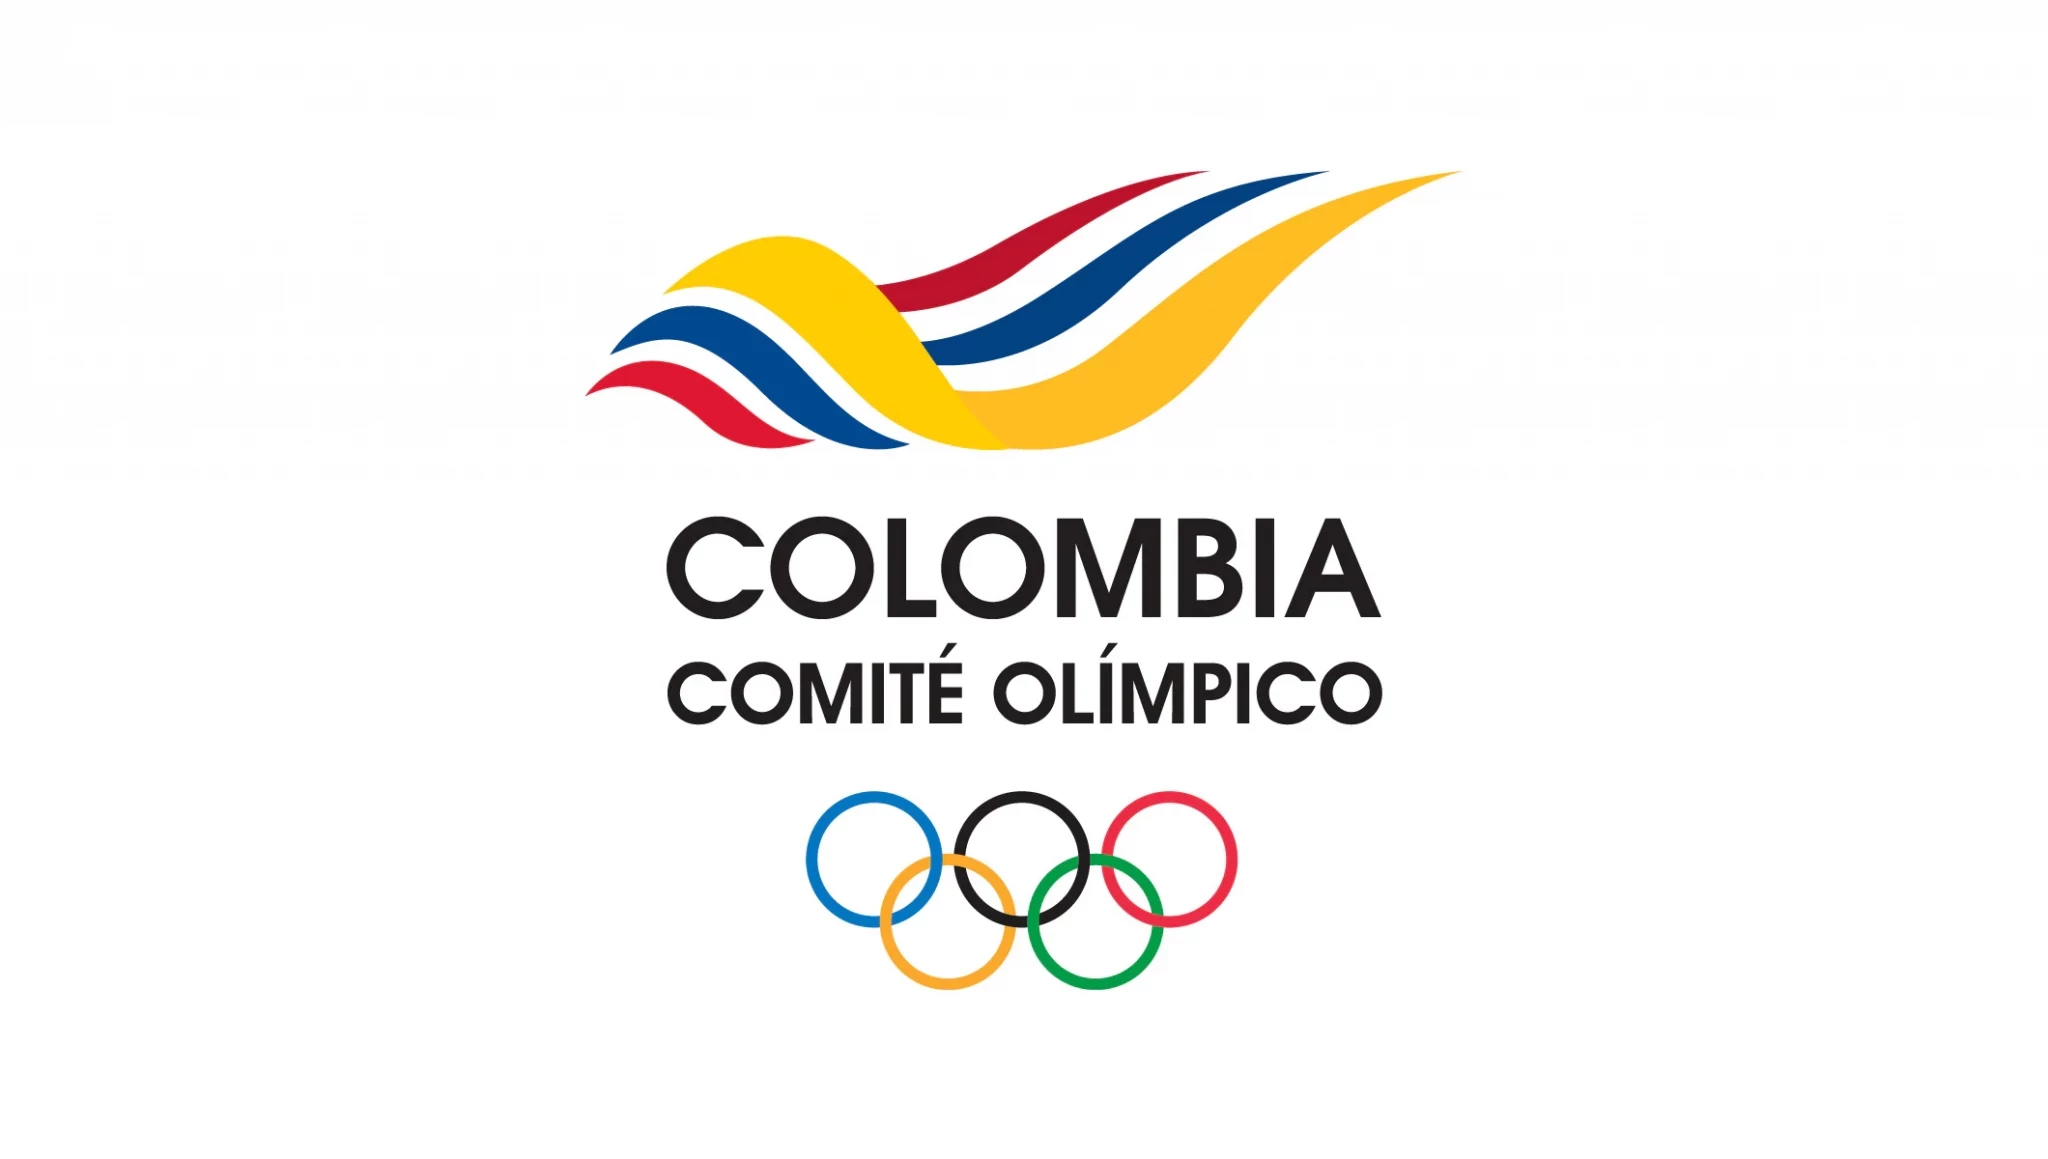 Fifteen athletes shortlisted for Colombian Olympic Committee youth scholarships